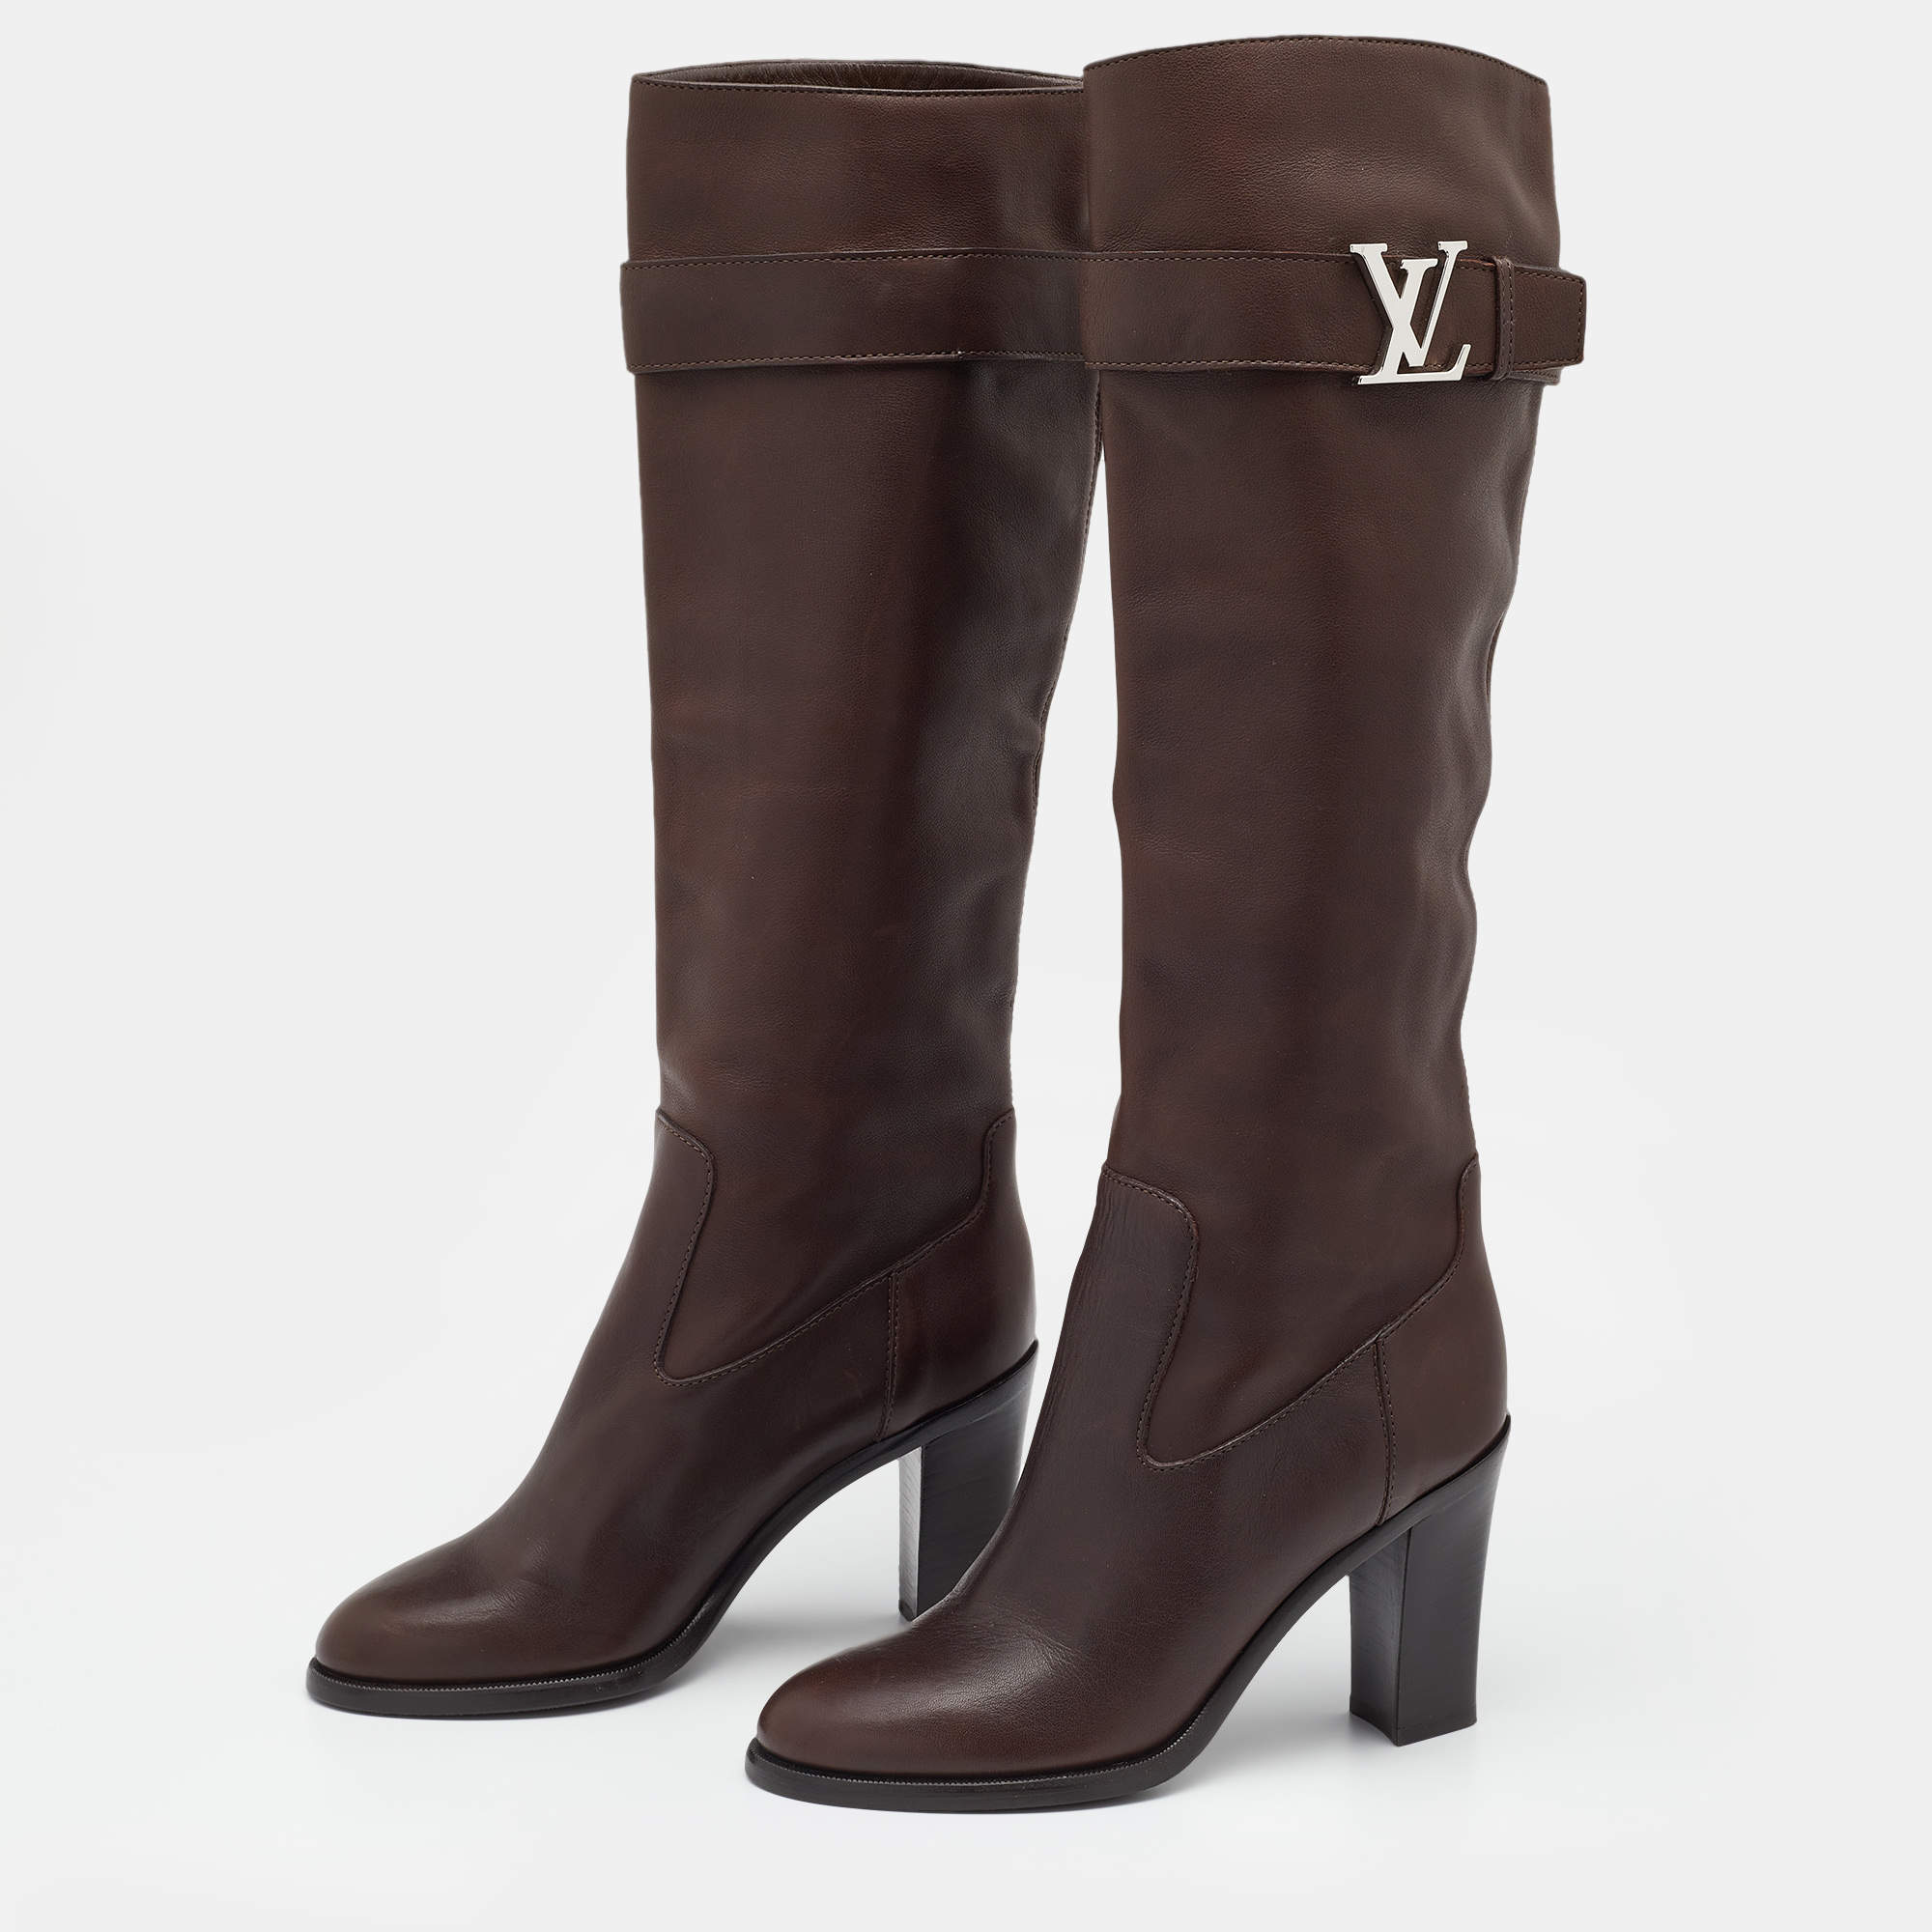 LOUIS VUITTON Suede Cowboy Knee High Tall Boots 36.5 Brown 882712